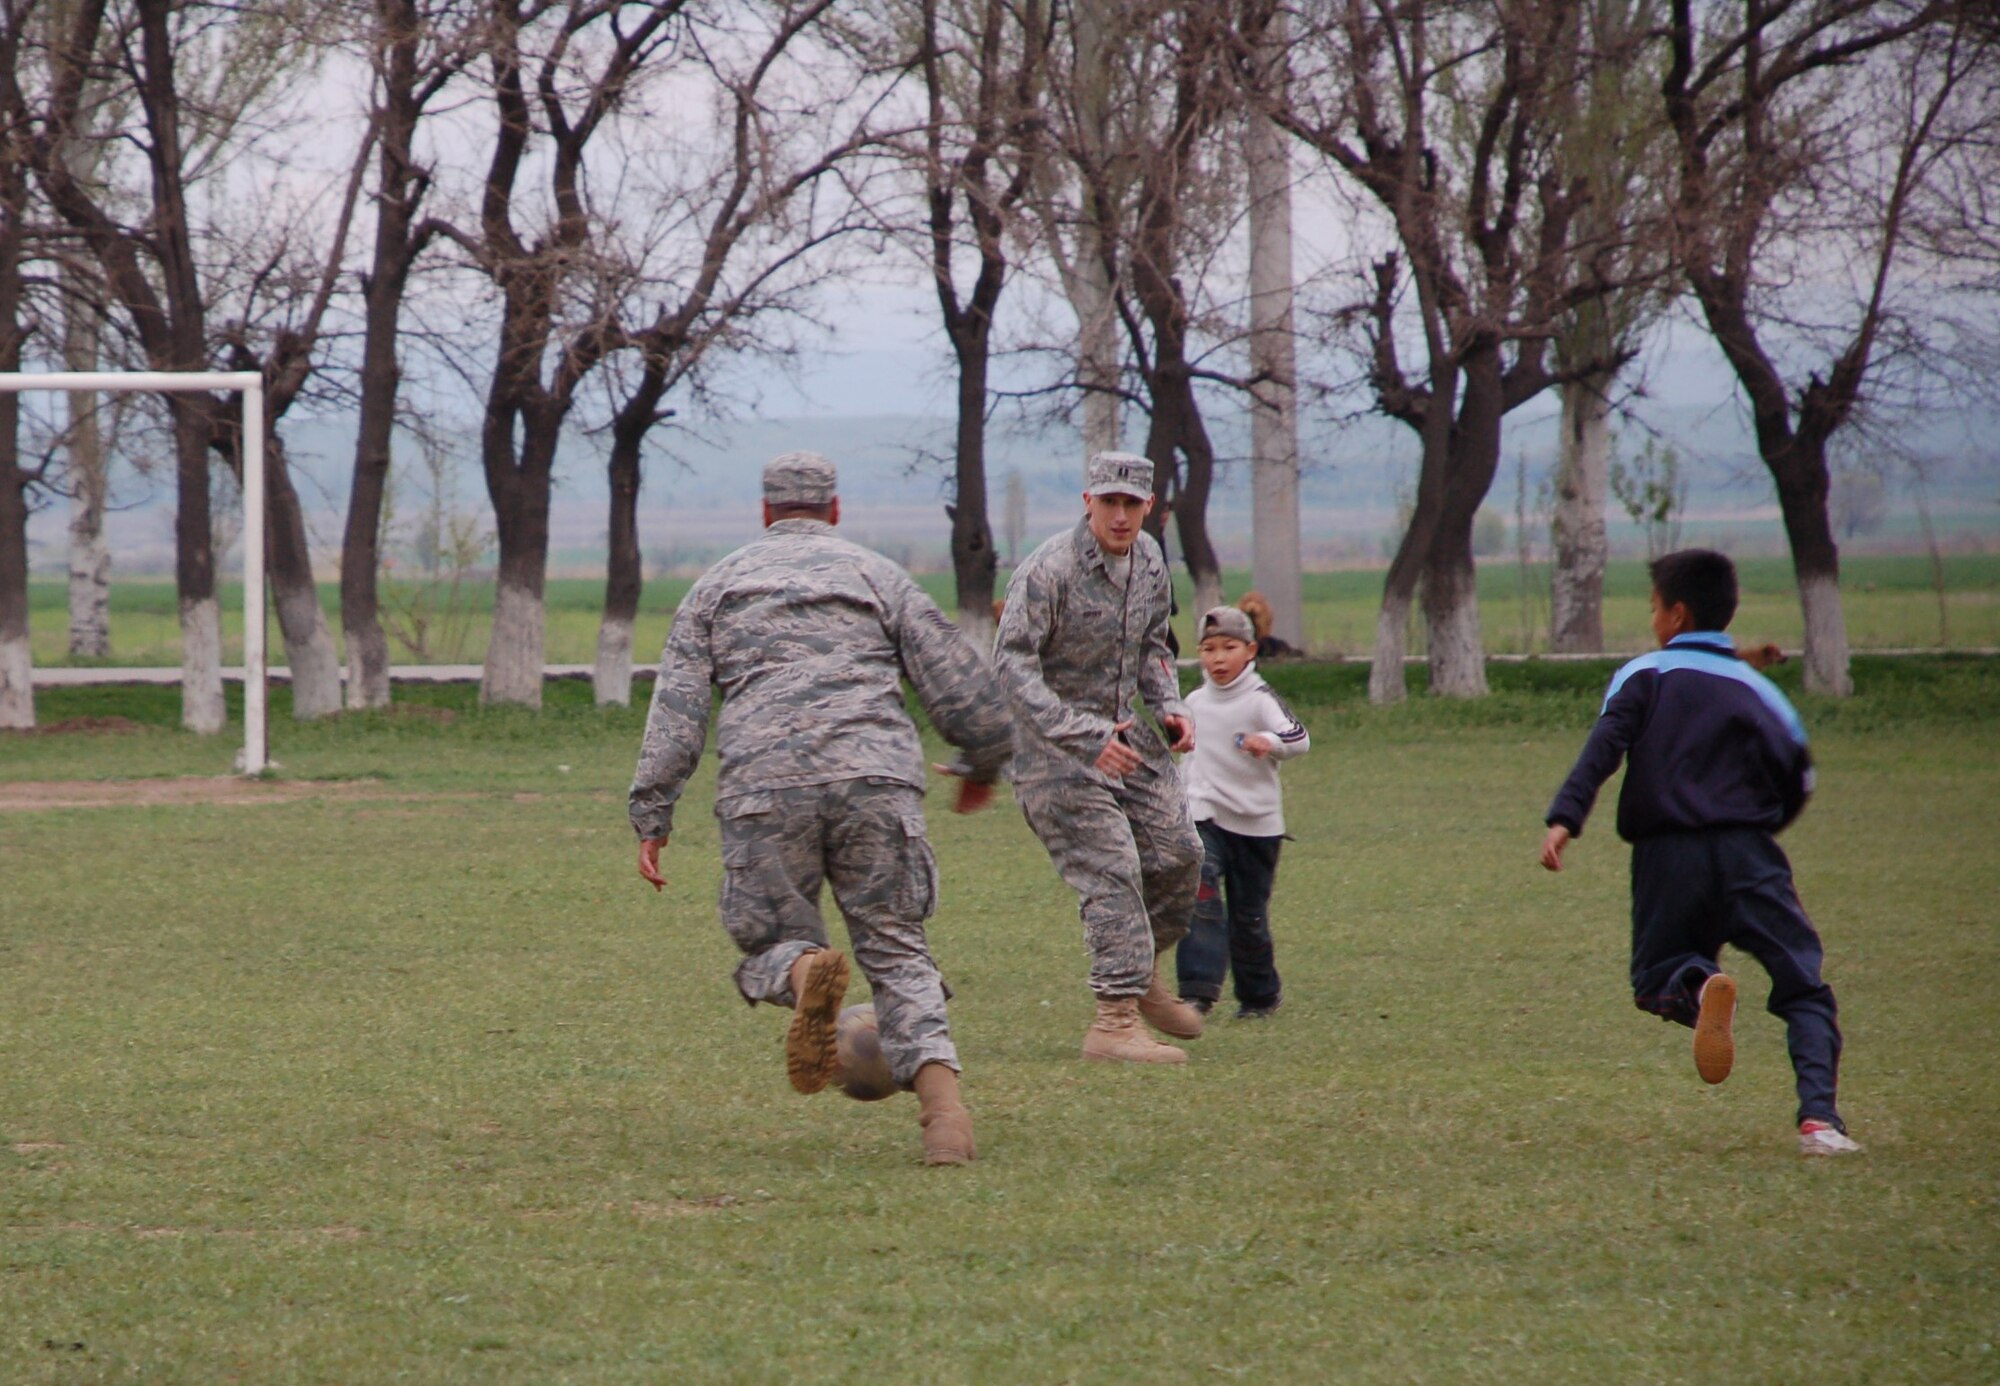 Following a ground breaking ceremony at Birdik Village School in Kyrgyzstan students from the school challenge Airmen from nearby Manas Air Base to an impromptu game of soccer, April 14. The Airmen were no match for the Kyrgyz children's sheer numbers, agility and speed, and ended the exciting game, 2-3. The ground breaking ceremony kicked off a six-month, $470,000 project to renovate the school, currently a shell of a building. Funded by the U.S. Central Command and managed by Airmen from Manas AB, the project is scheduled for completion in Autumn 2009 and will provide a quality learning environment for 200 students. A local Kyrgyz company, Imarat Stroy, was awarded the contract March 17 and has already gutted the building in preparation for the rebuilding effort. (U.S Air Force photo/Tech. Sgt. Phyllis Hanson)  